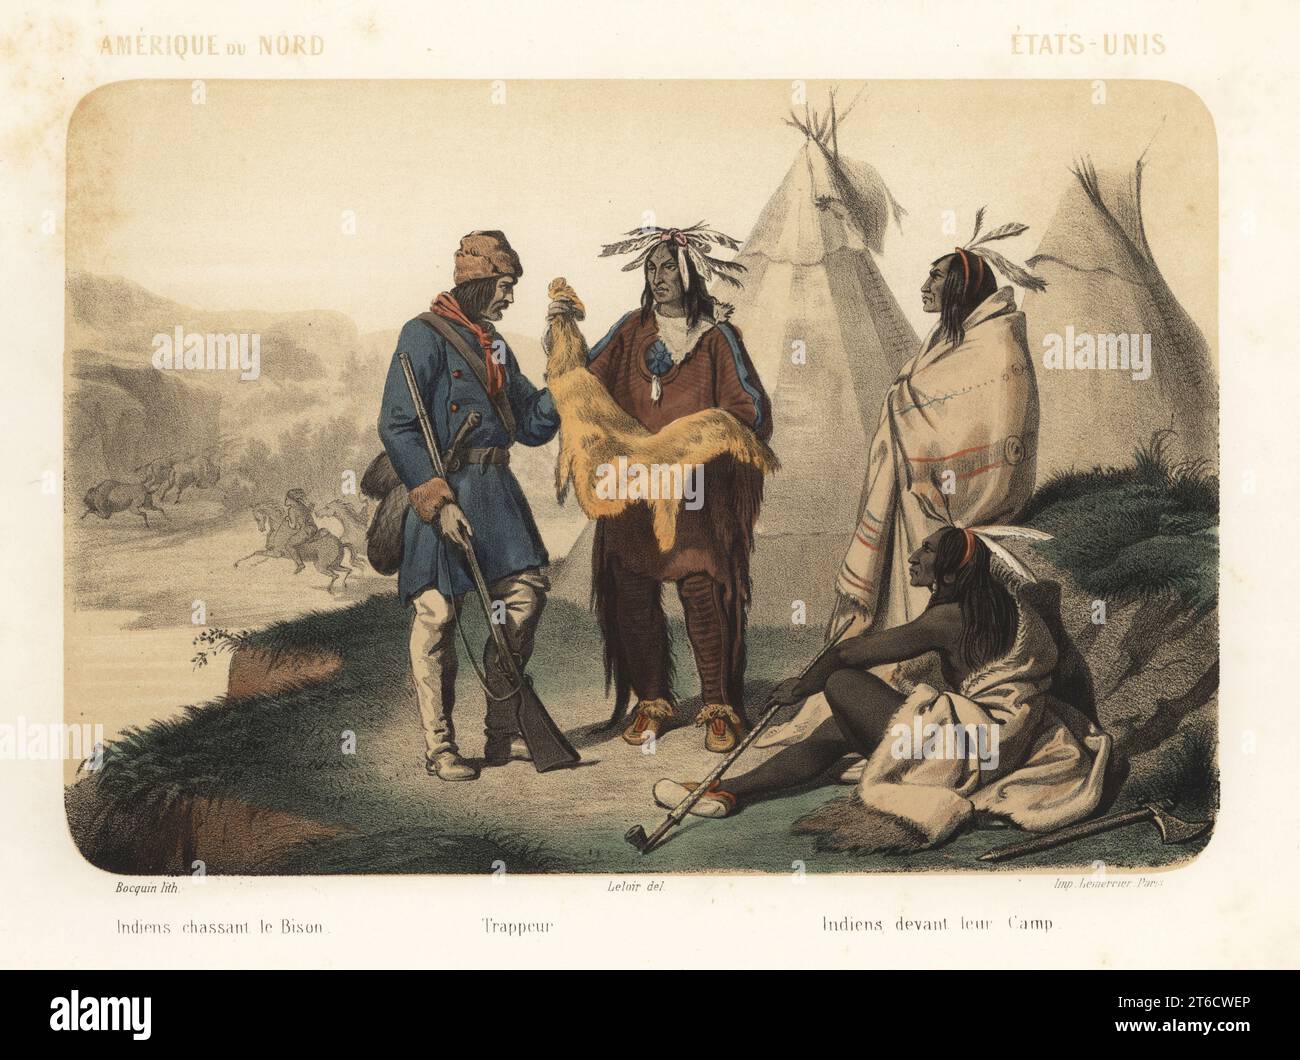 Costumes of North America, 1858. Native Americans or Plains Indians hunting buffalo, European trapper buying skins from Native Americans, wearing feather headdresses and blankets in front of their teepees. Indiens chassant le bison, trappeur, Handcoloured and sepia-tinted lithograph by Jean-Adolphe Bocquin after an illustration by Auguste Leloir from Elisabeth Muller (pseudonym of Leonie Bedelet)s Le Monde en Estampes, The World in Prints, Amadee Bedelet, Paris, 1858.. Indiens devant leur camp. Stock Photo